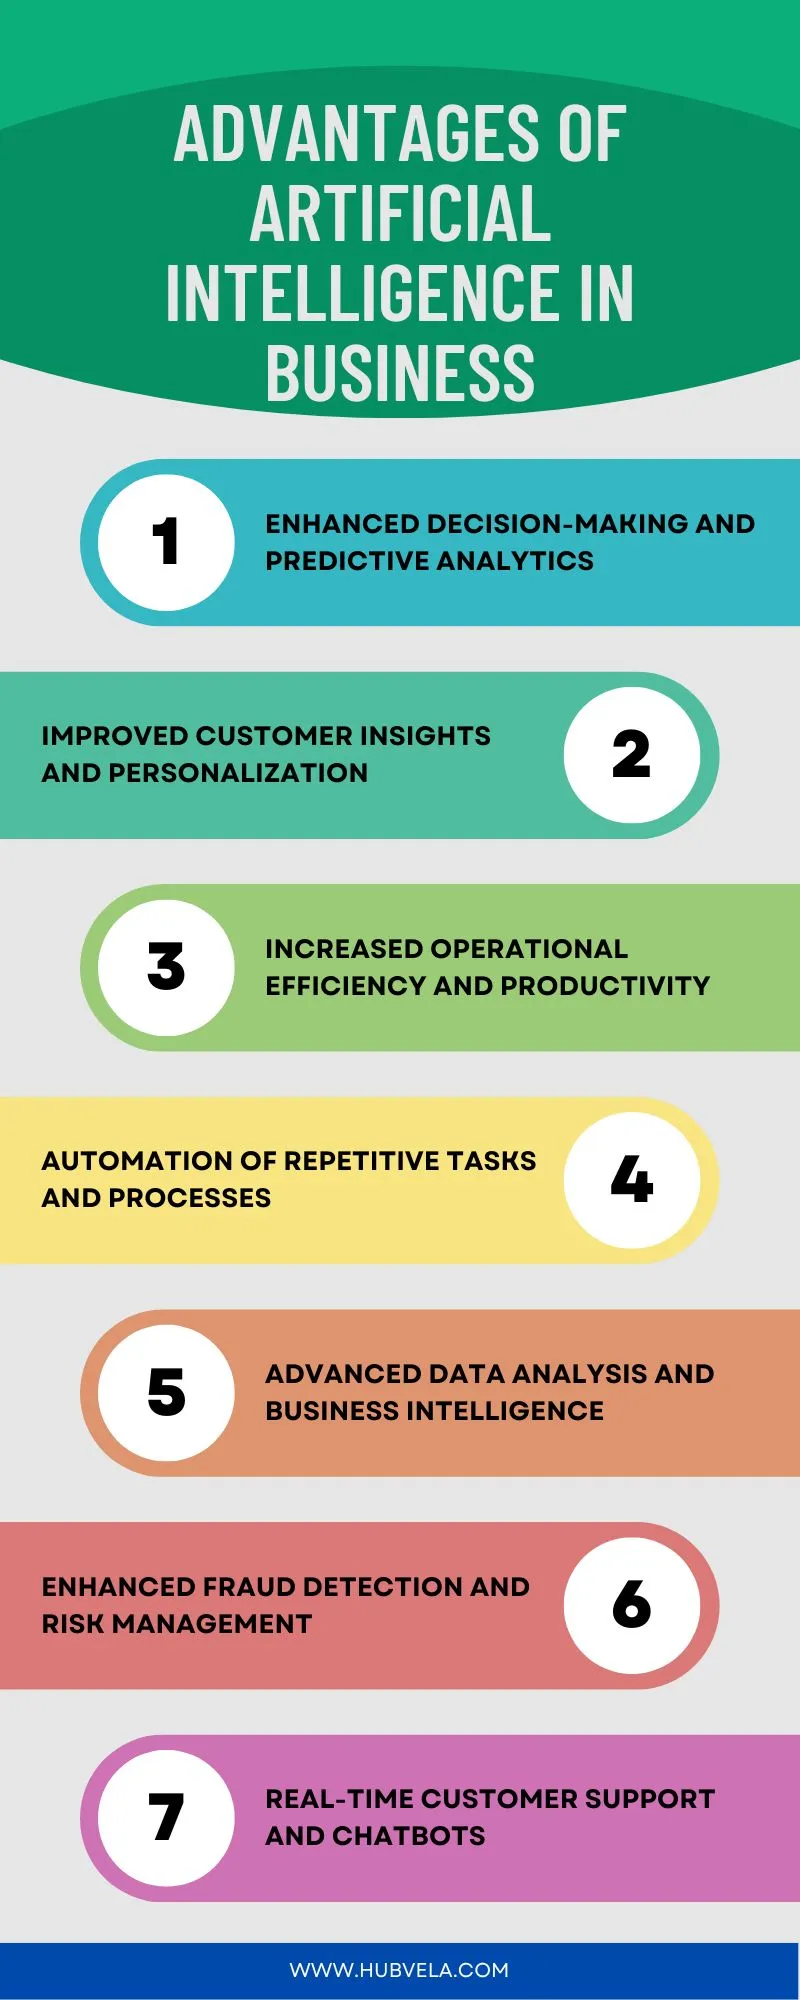 Advantages of Artificial Intelligence in Business Infographic